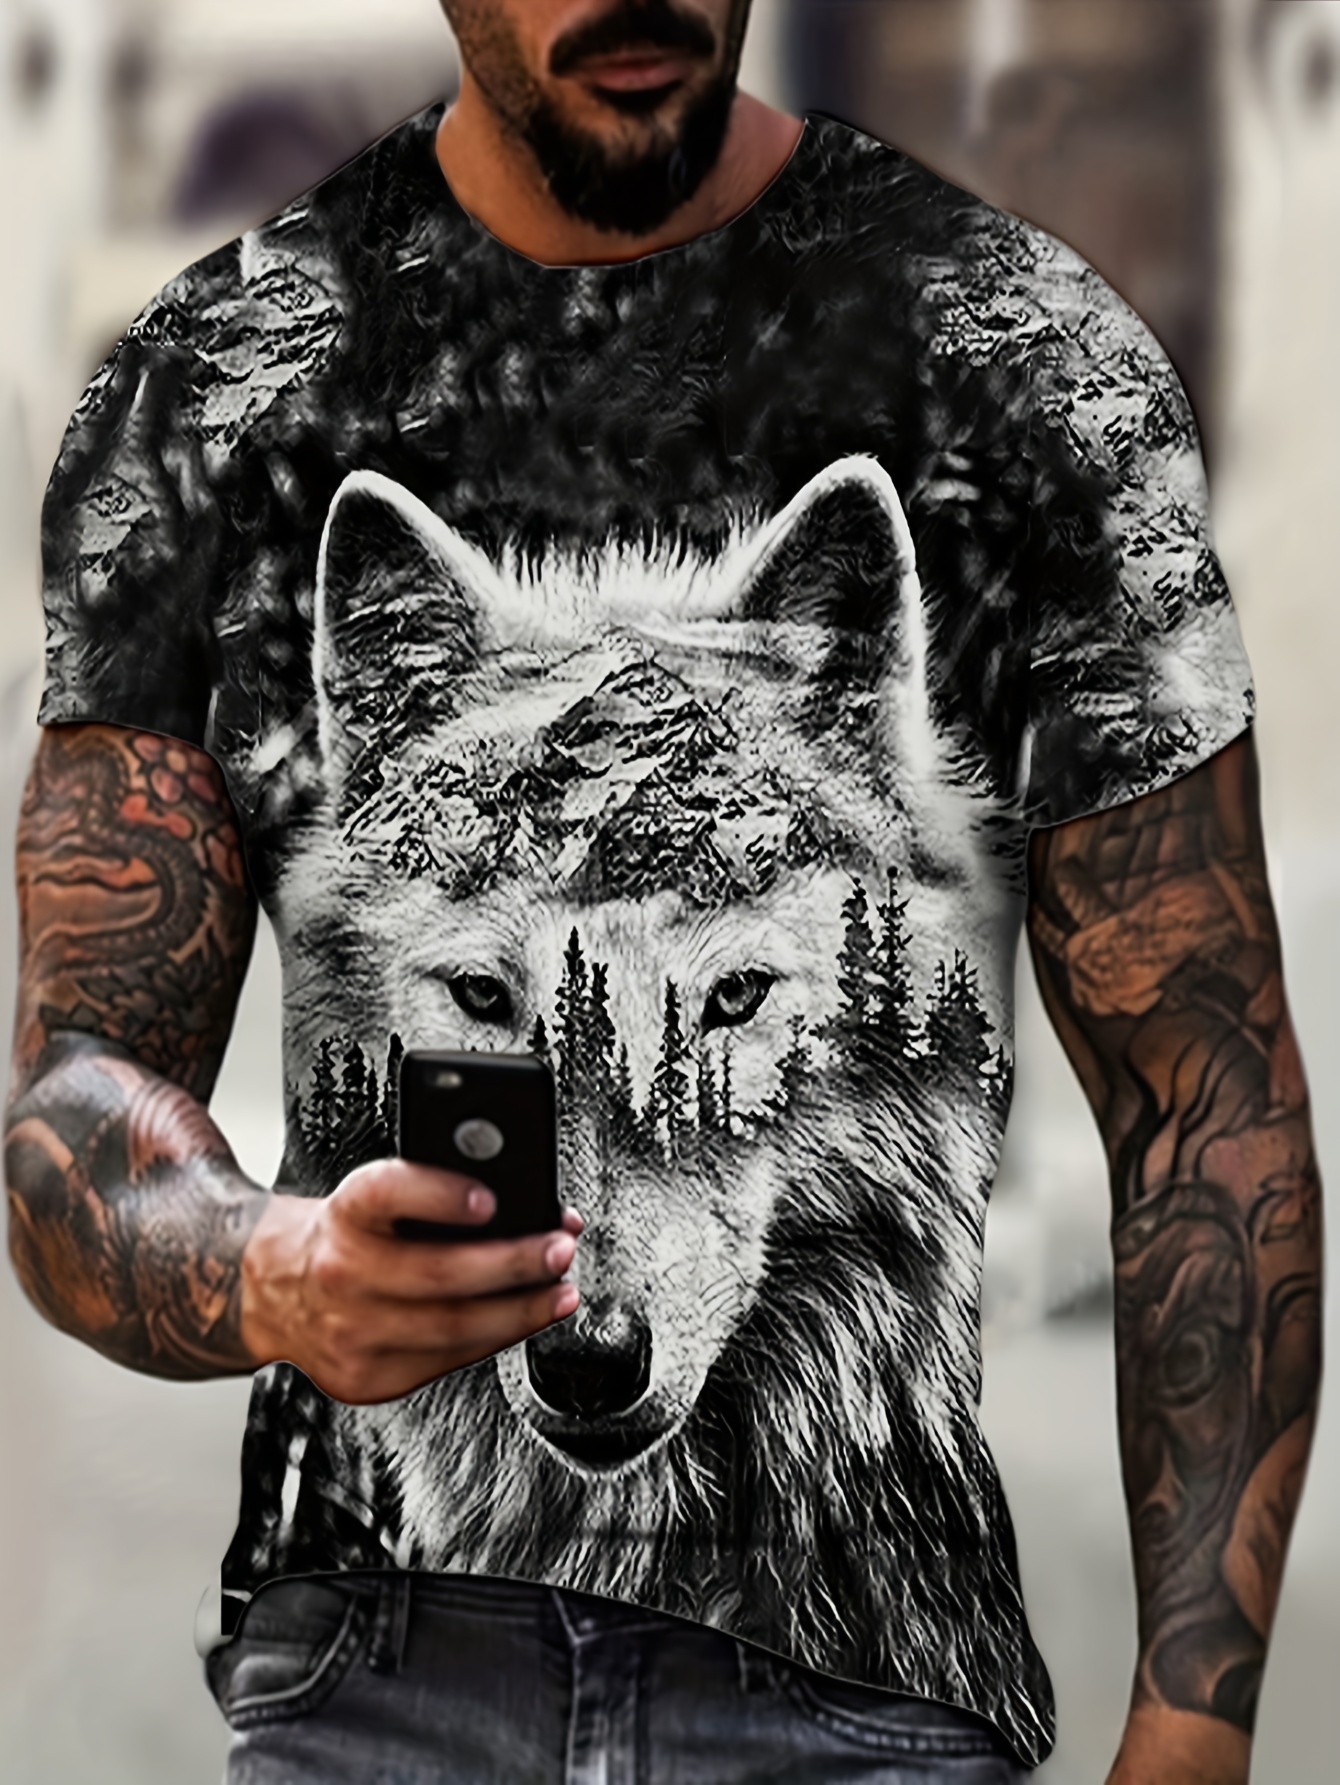 Plus Size Men's 3D Wold Graphic Print T-shirt Funky Causal Short Sleeve  Tees Summer Tops, Men's Clothing